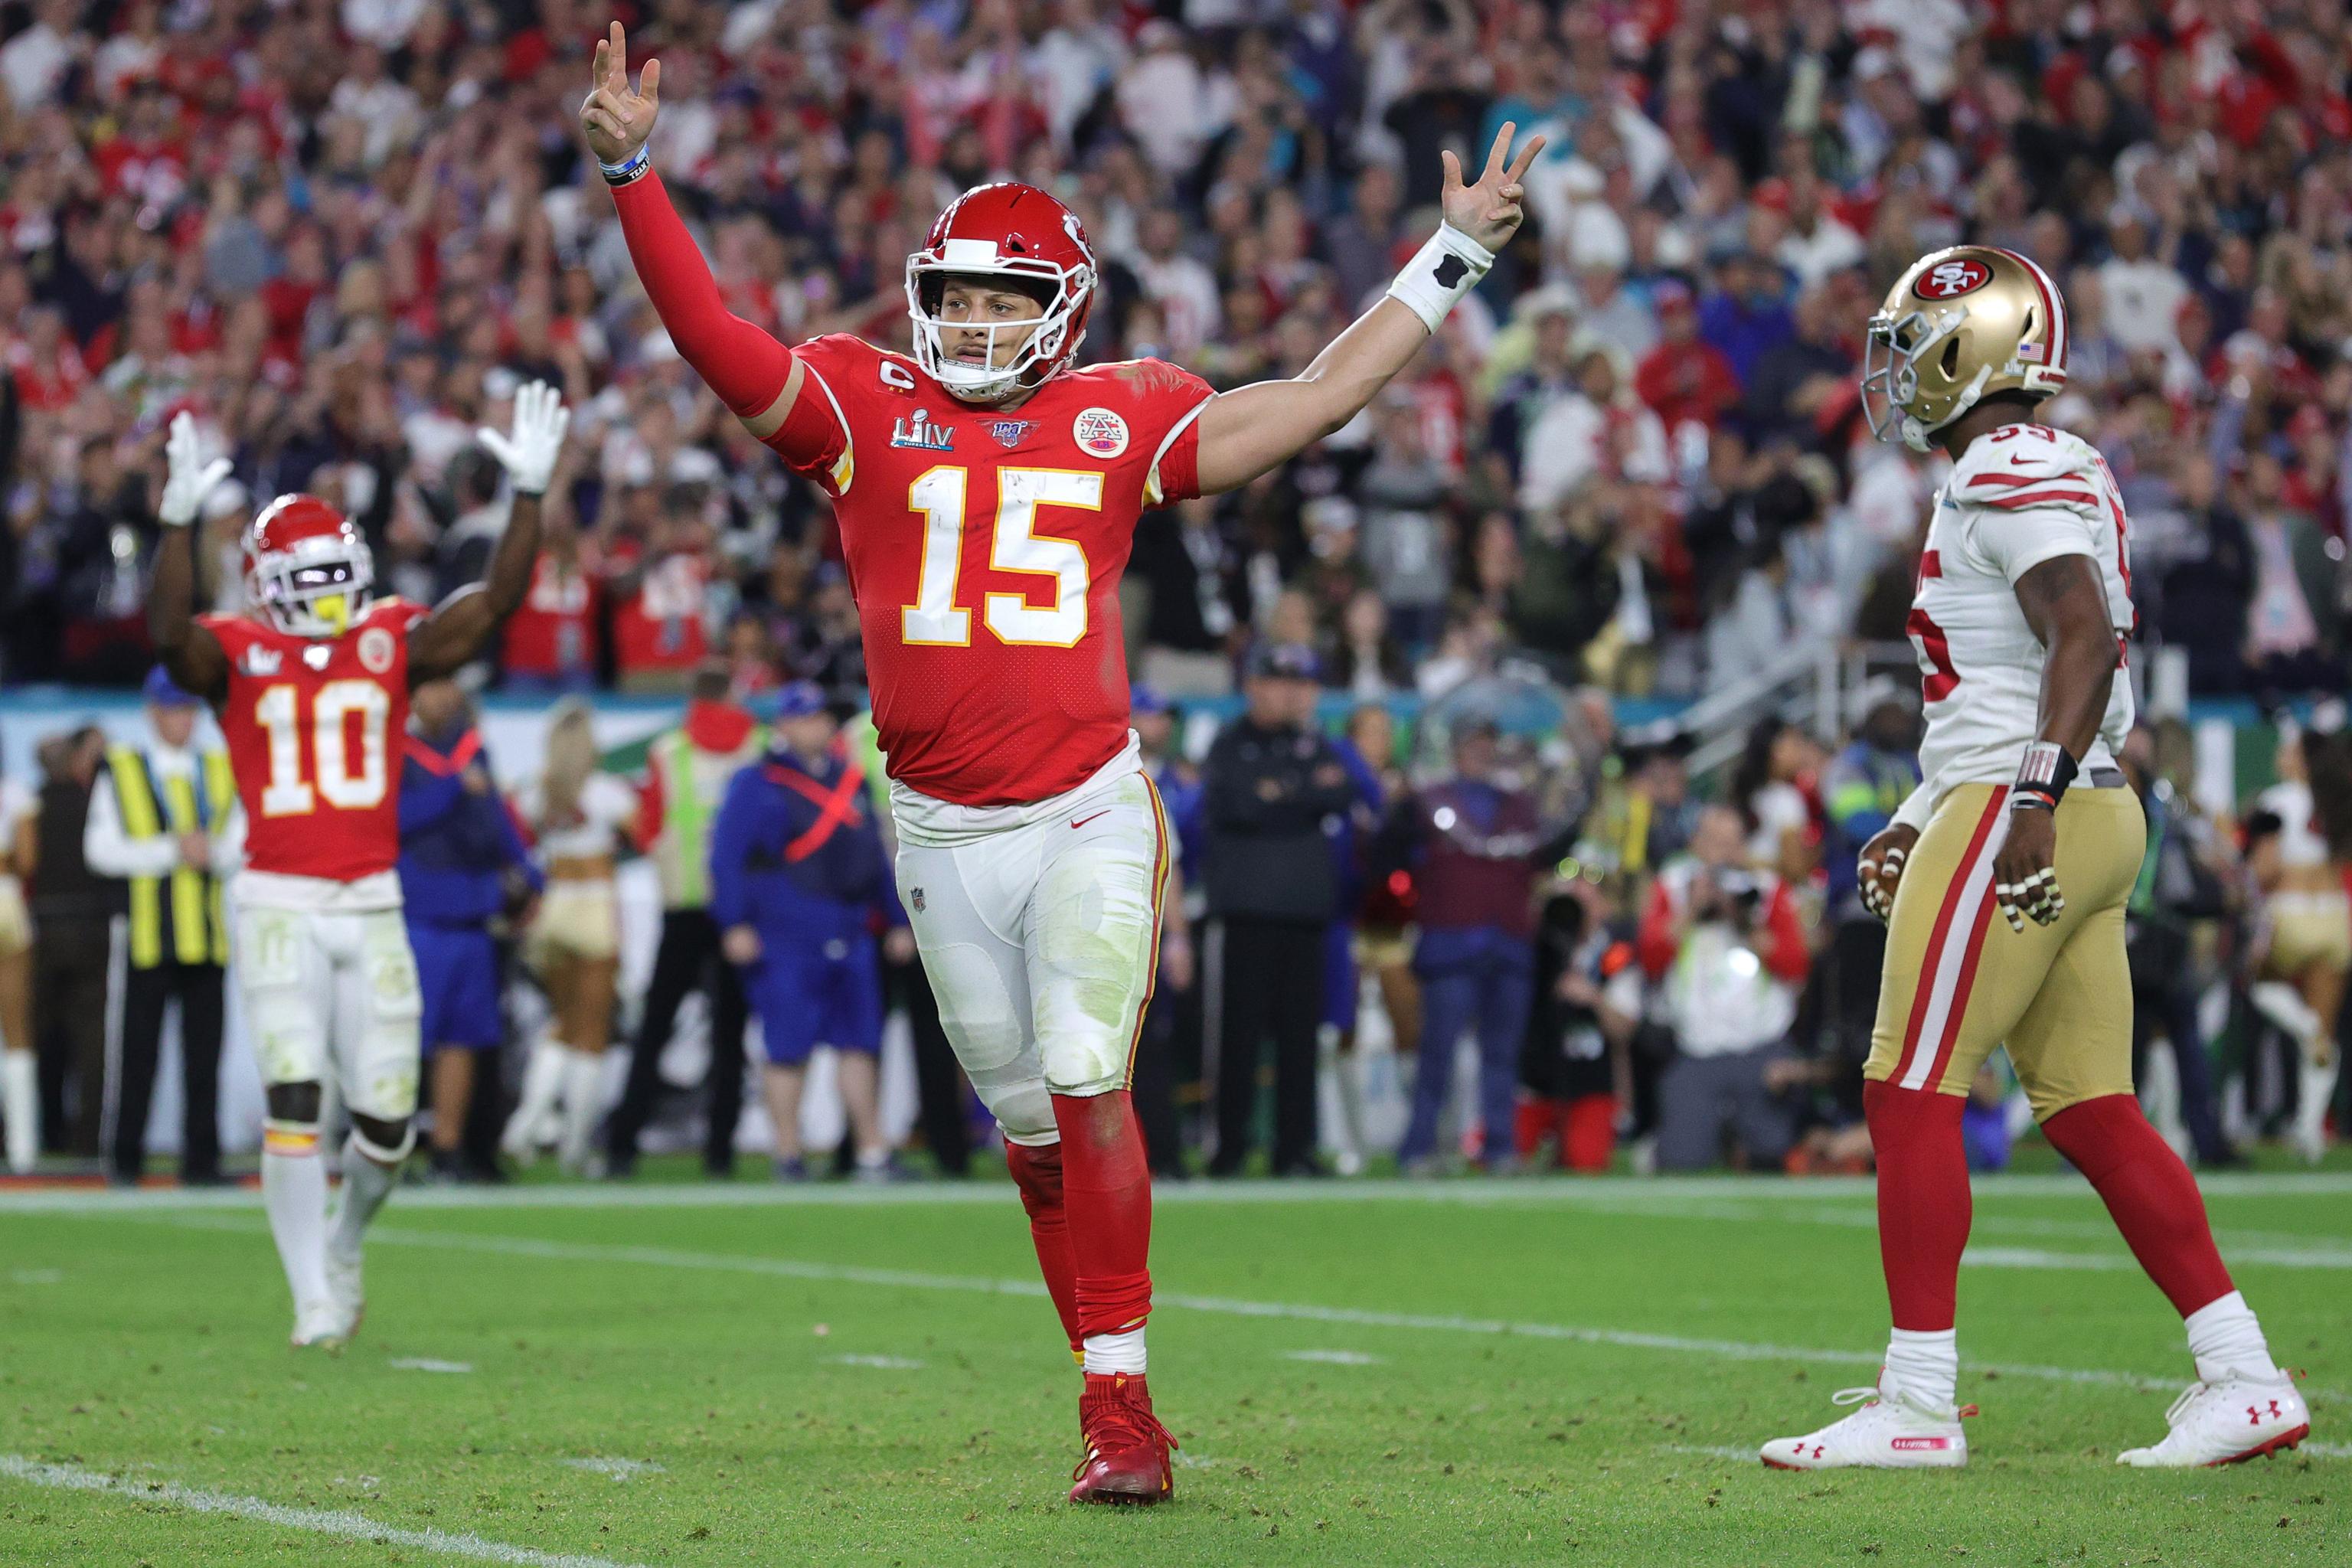 Kansas City Chiefs' Super Bowl History, Game Appearances, and More